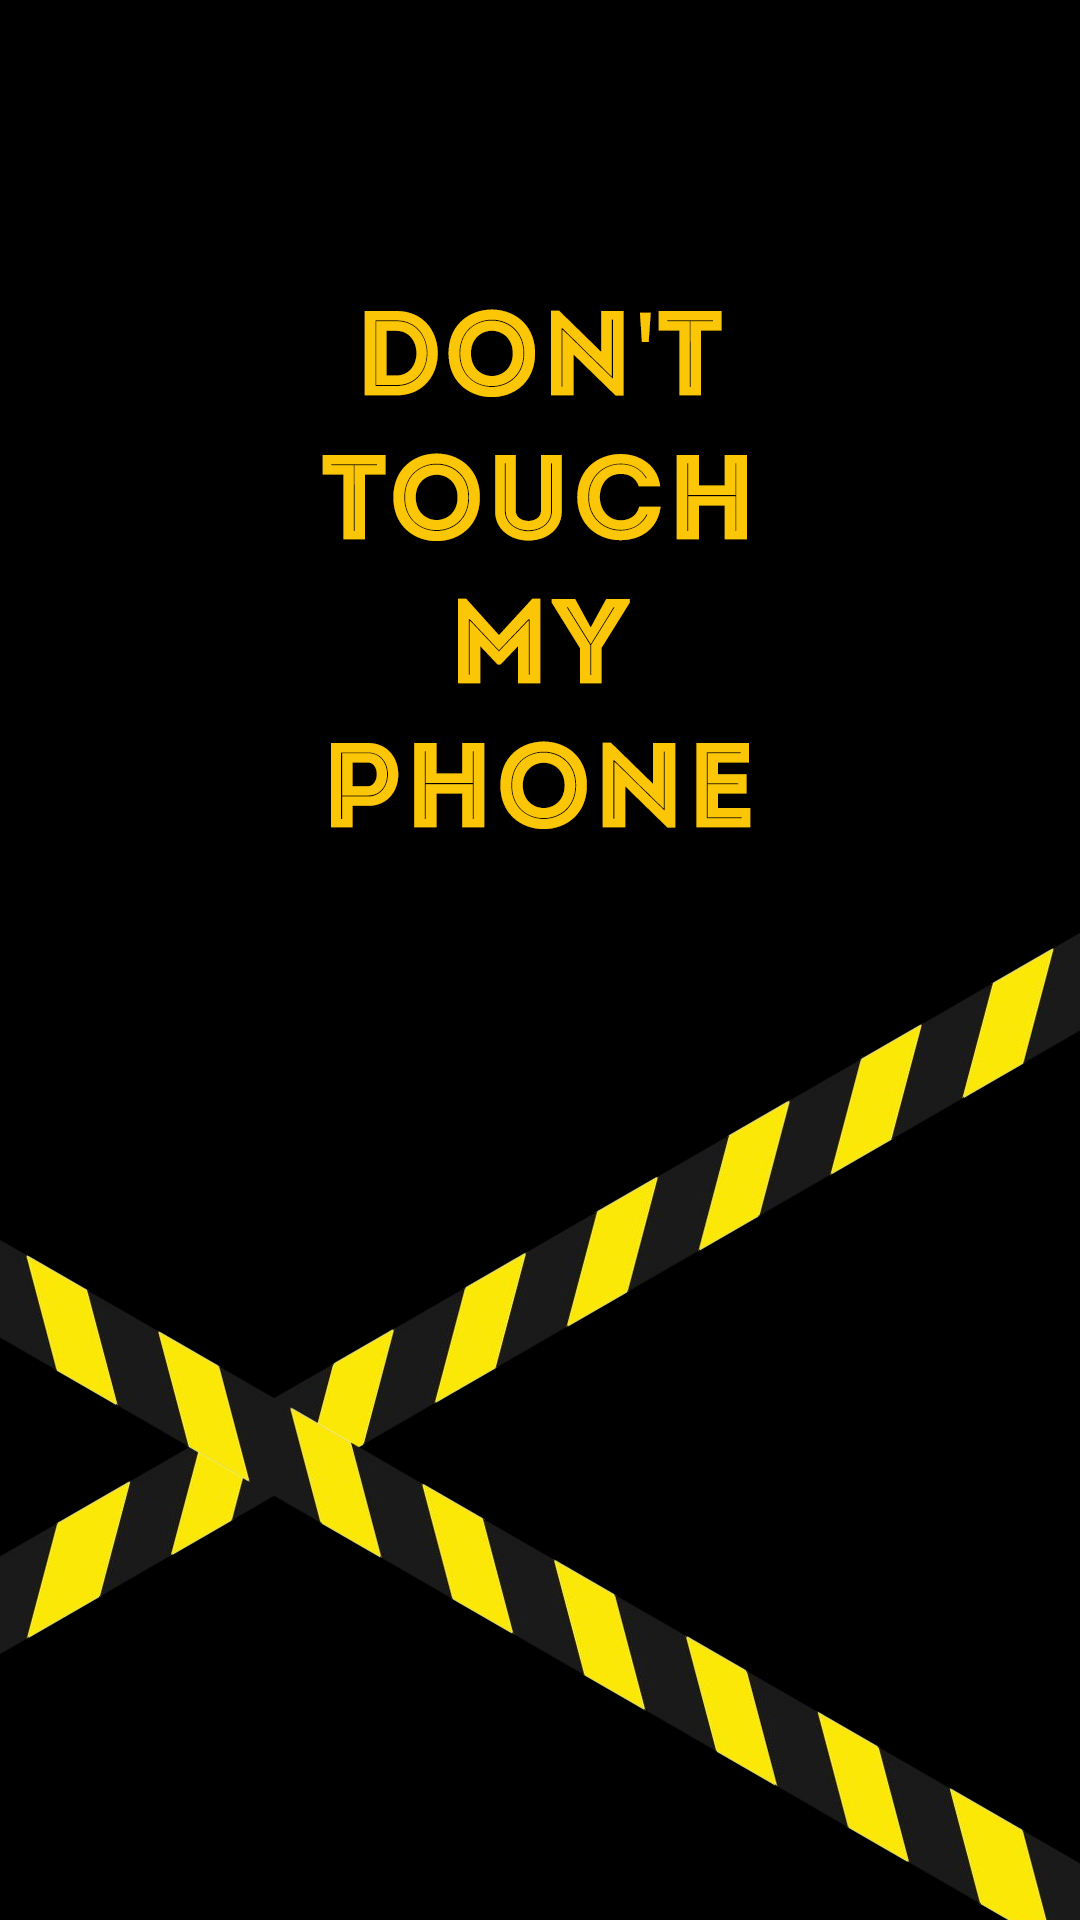 Don't touch my phone wallpaper – Apps on Google Play